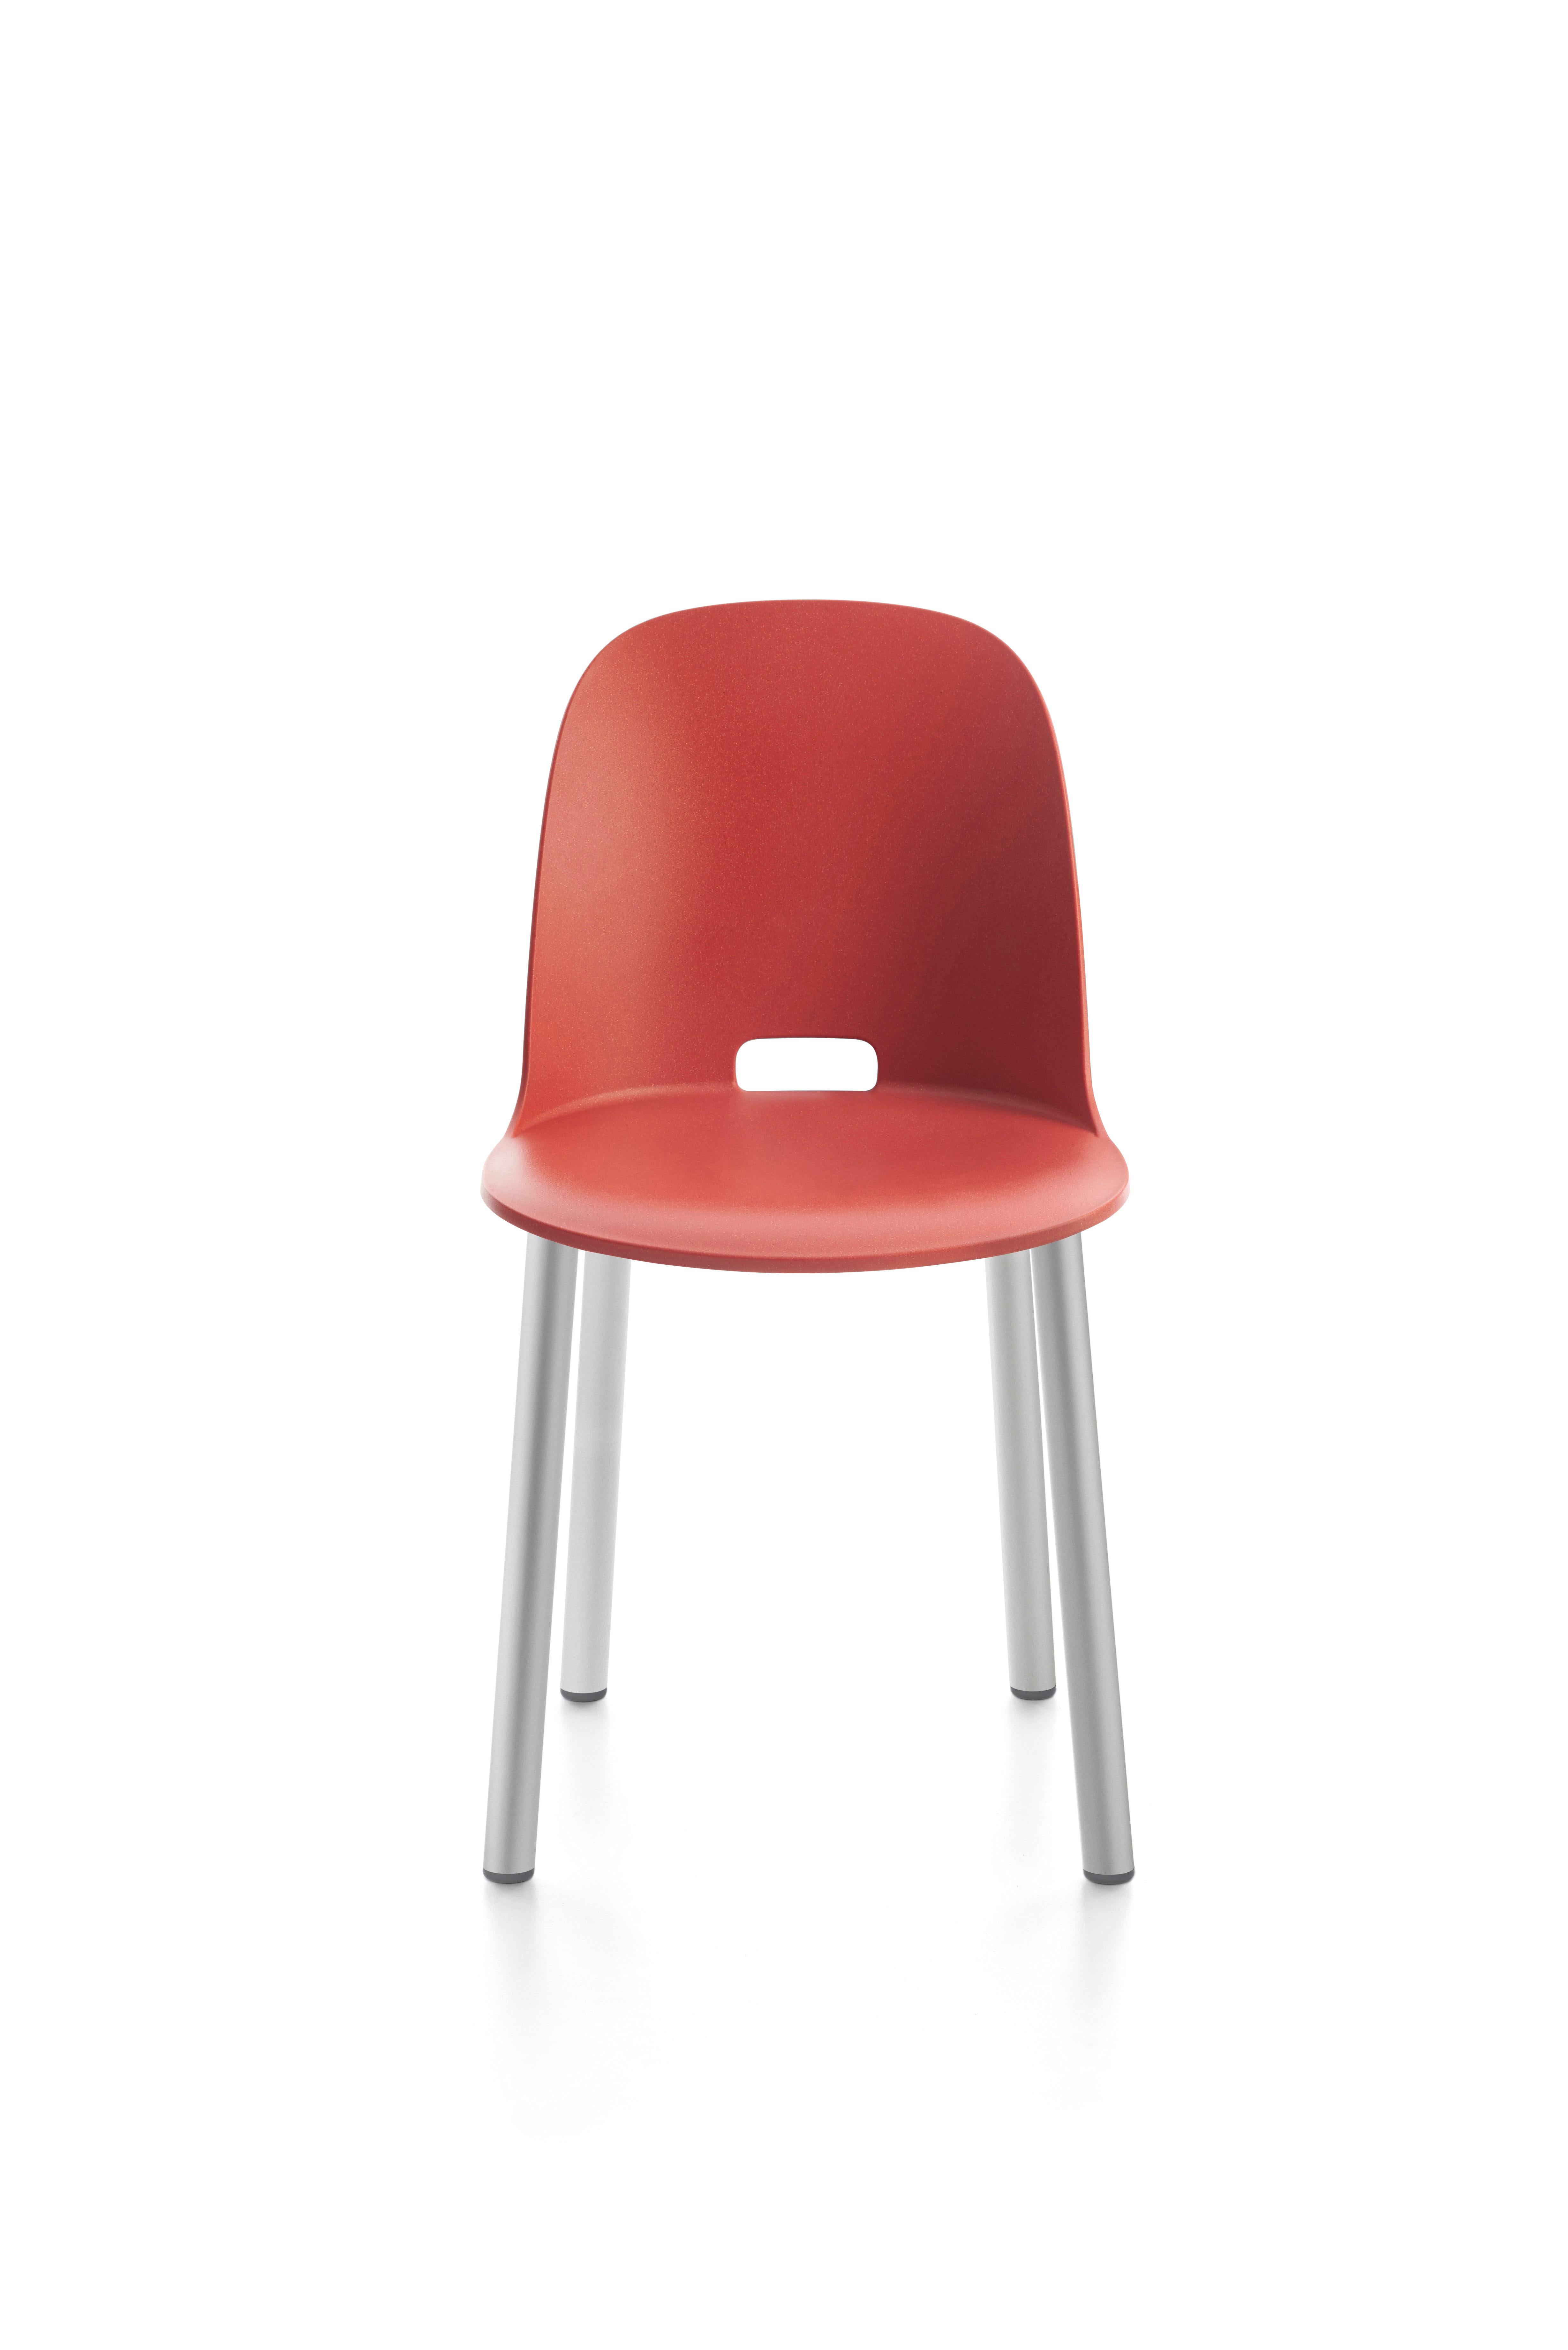 For Sale: Red (Alfi Red) Emeco Alfi High Back Chair with Aluminum Frame by Jasper Morrison